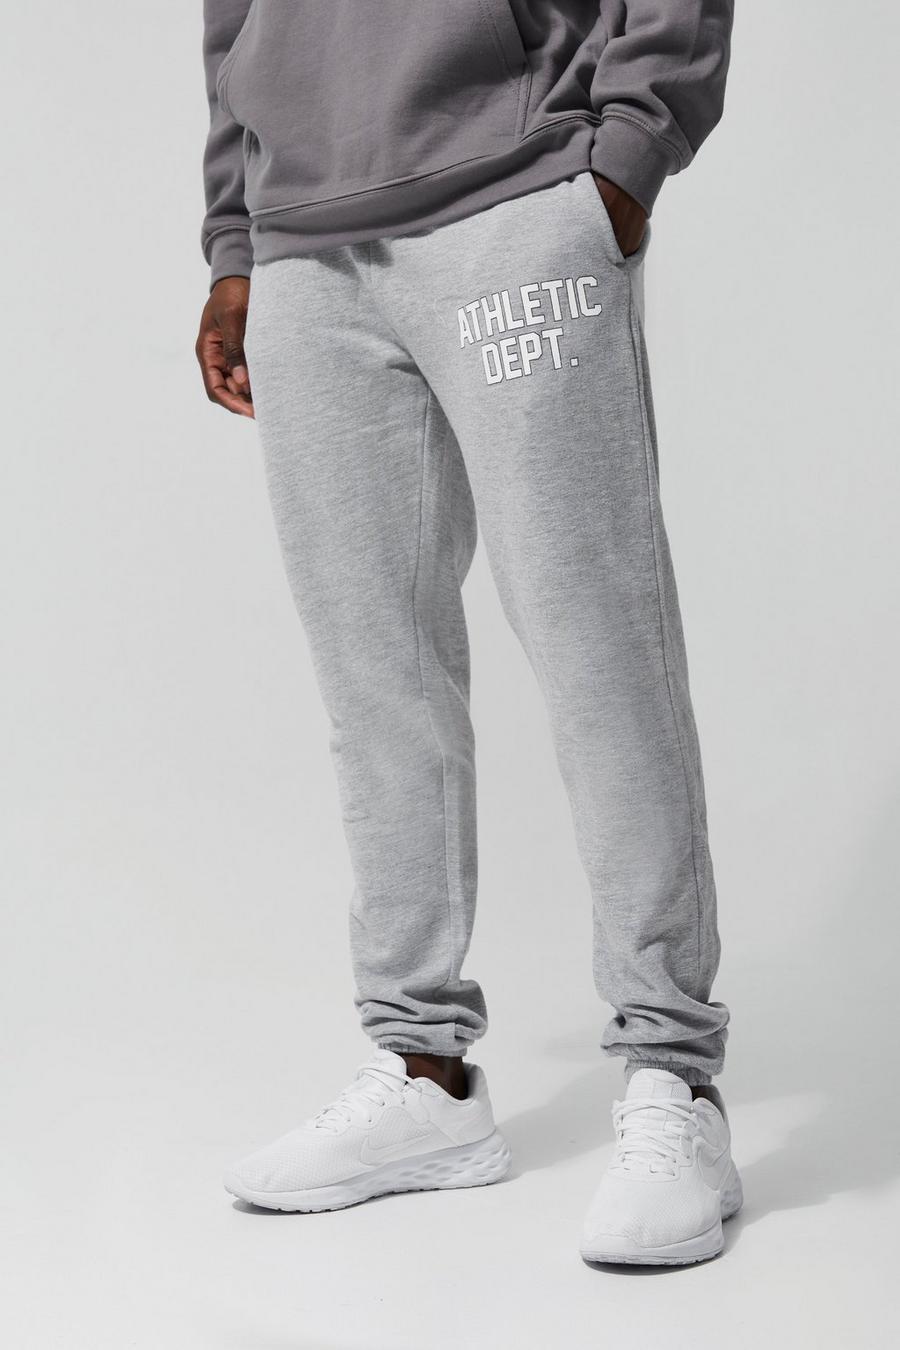 Grey Tall Man Active Athletic Dept. Joggers